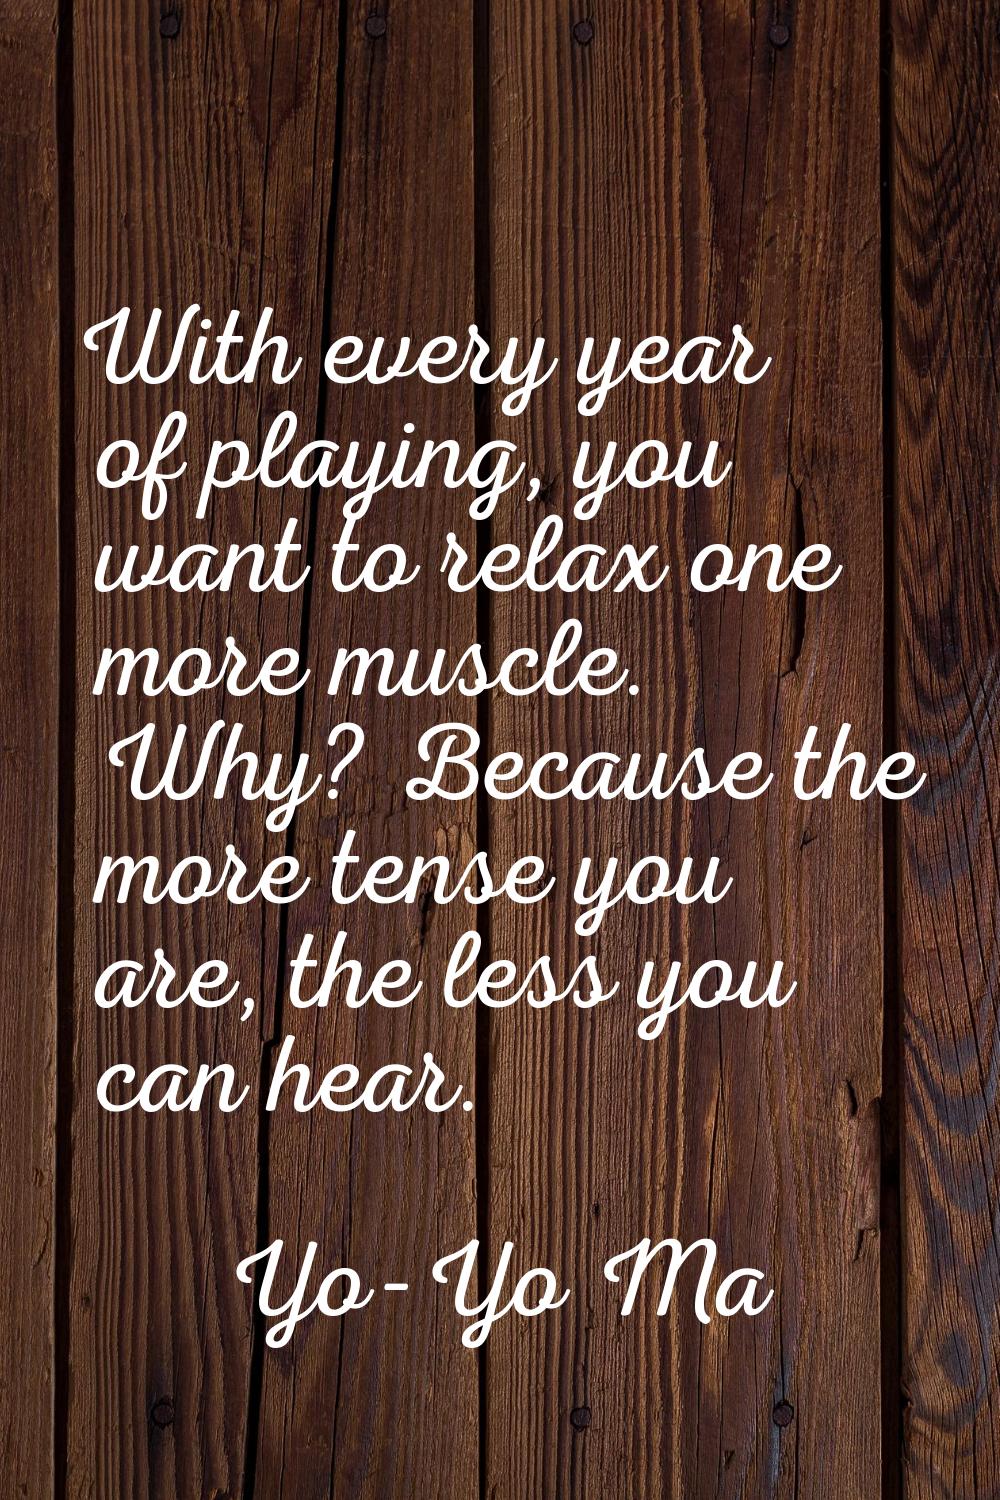 With every year of playing, you want to relax one more muscle. Why? Because the more tense you are,